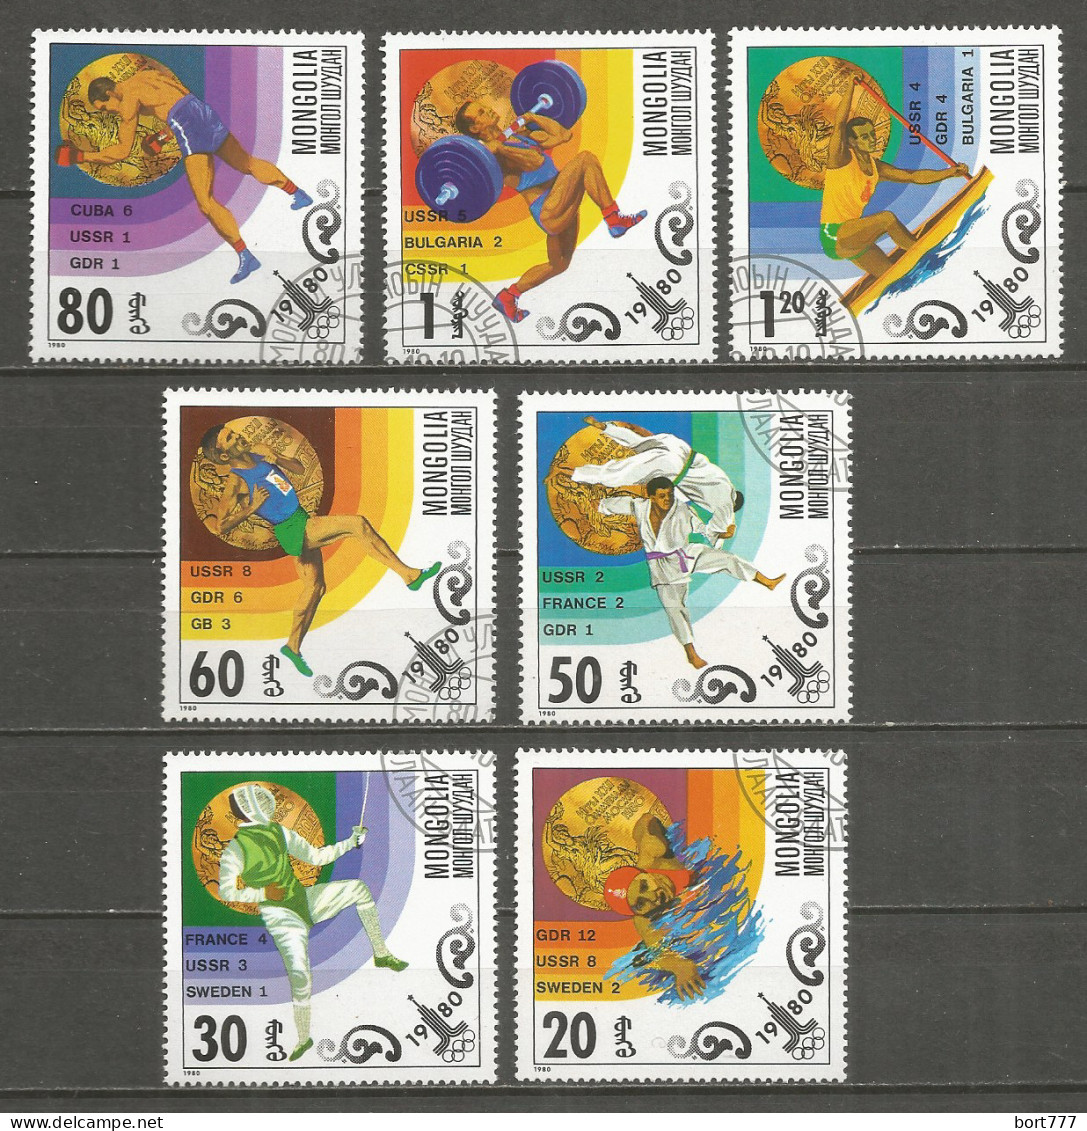 Mongolia 1980 Used Stamps CTO Sport Olympic Games - Mongolie